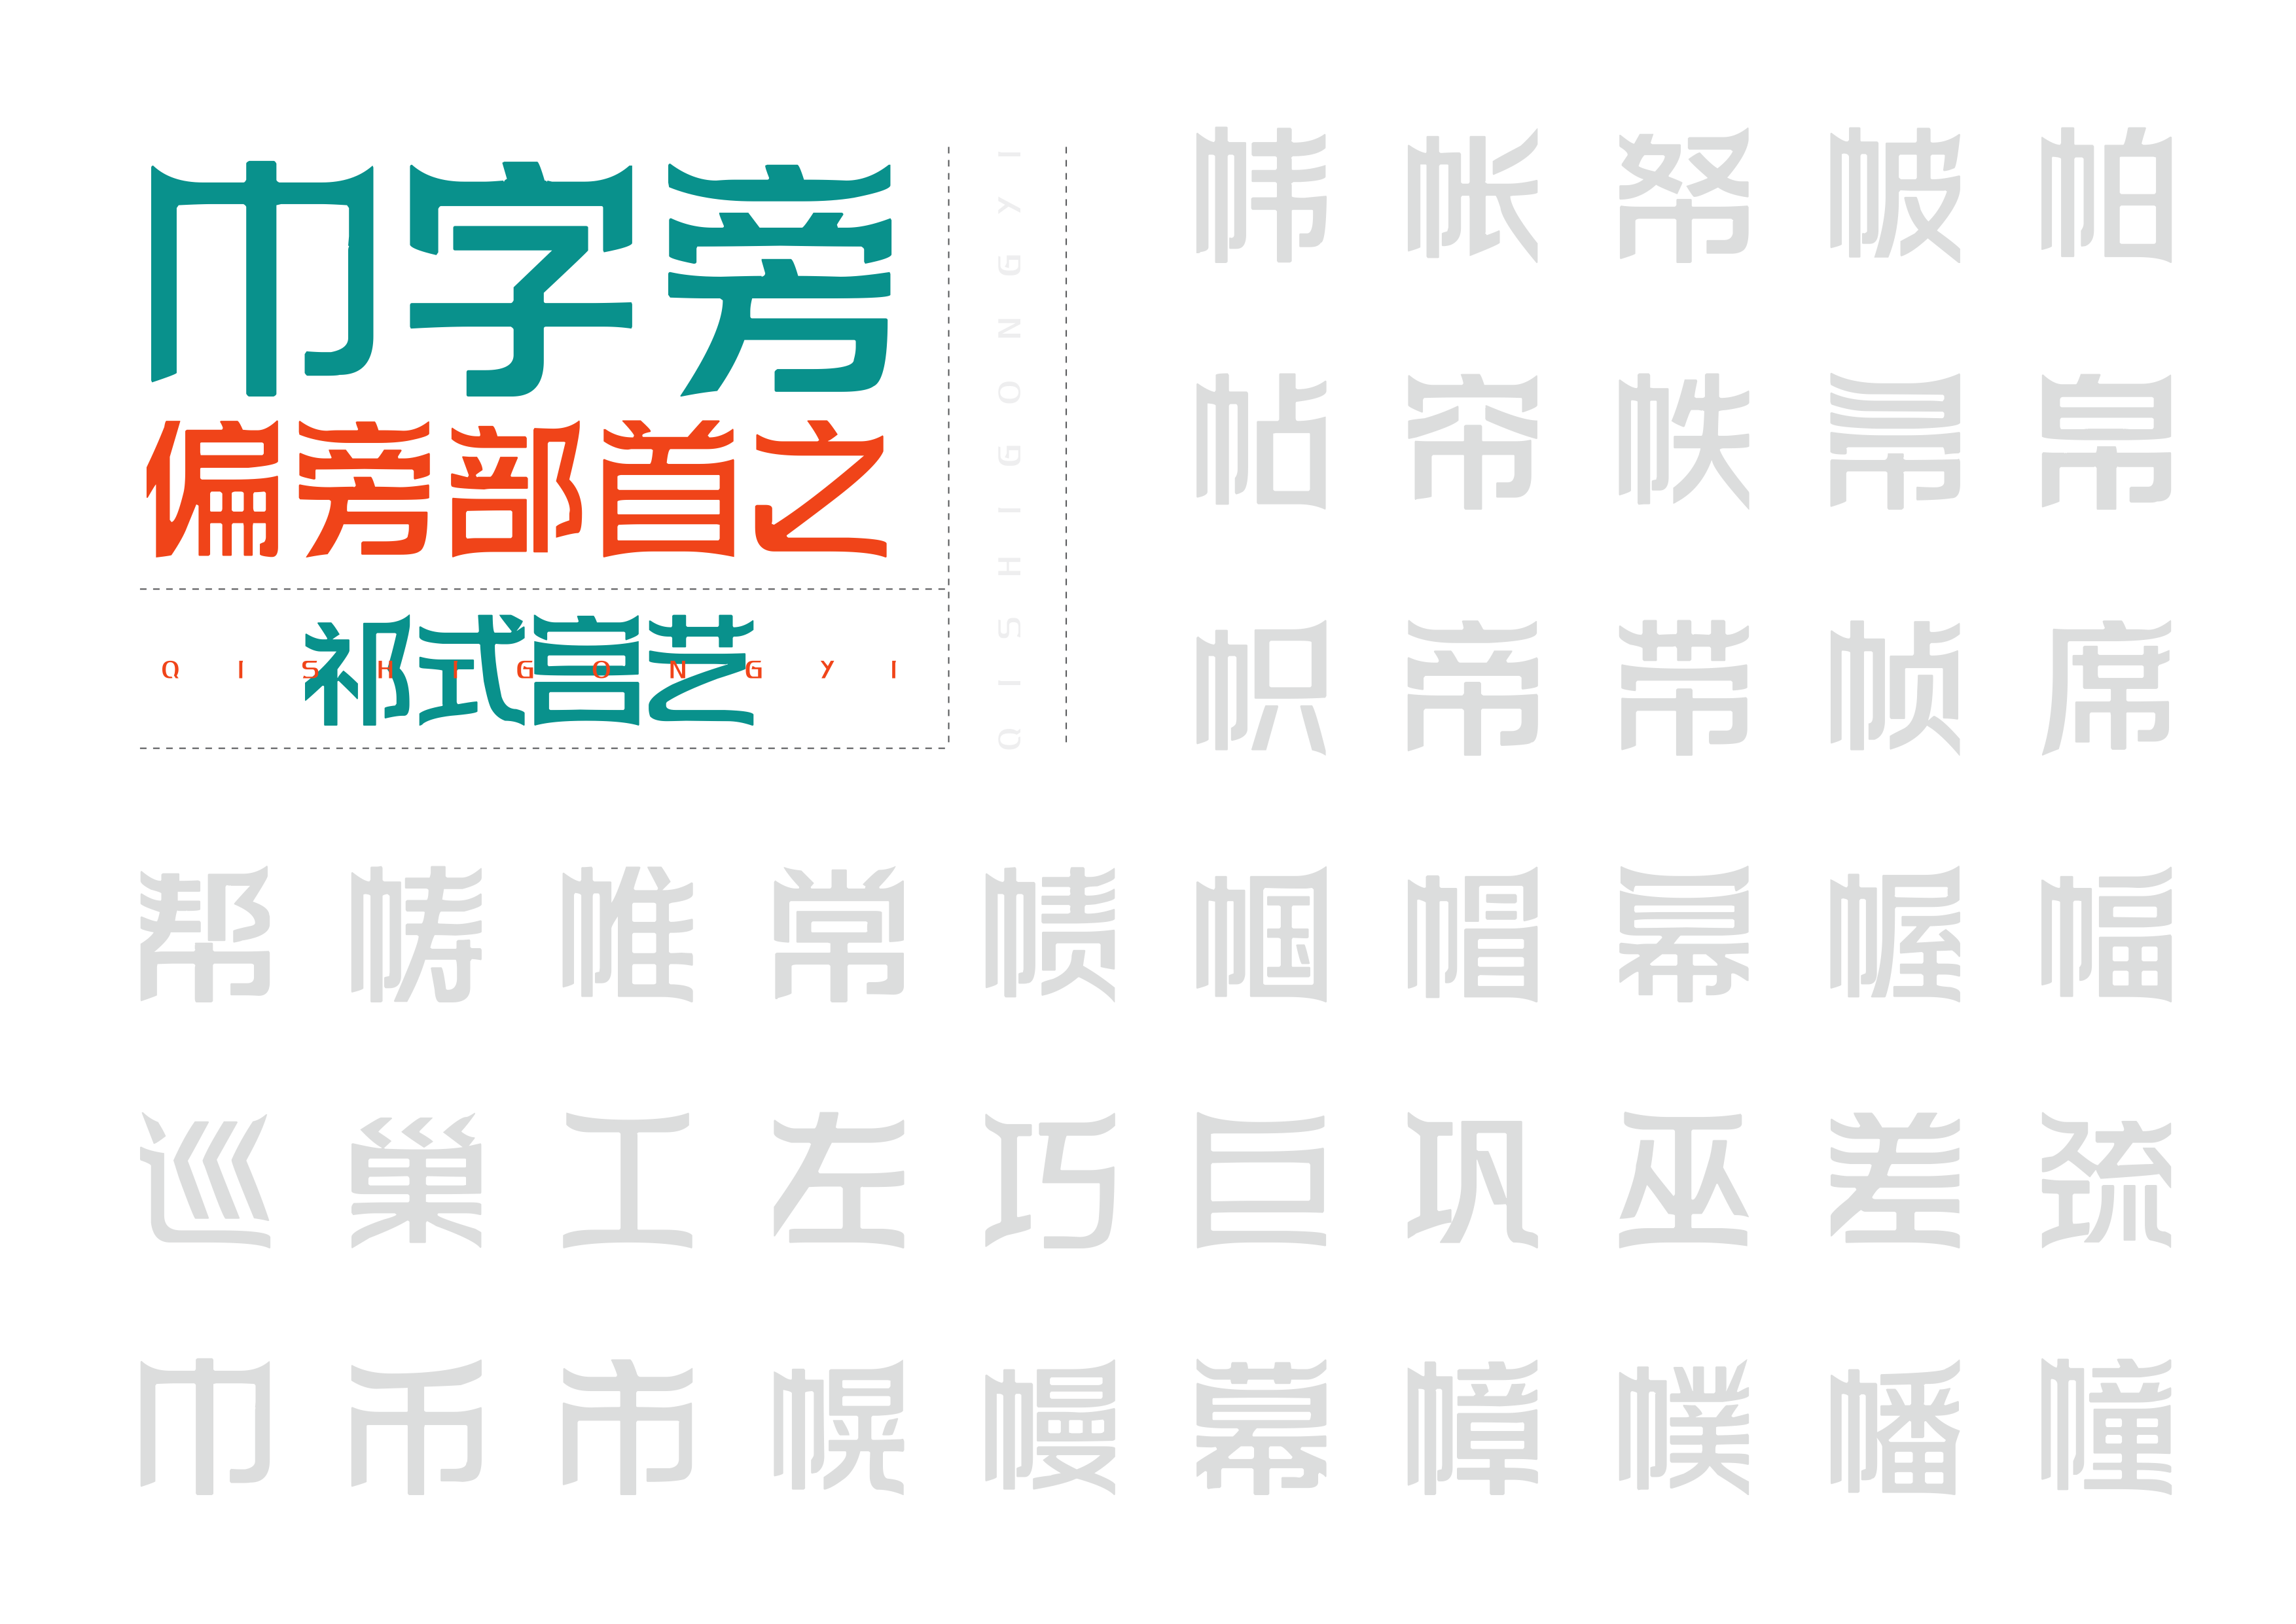 41P Collection of the latest Chinese font design schemes in 2021 #.37